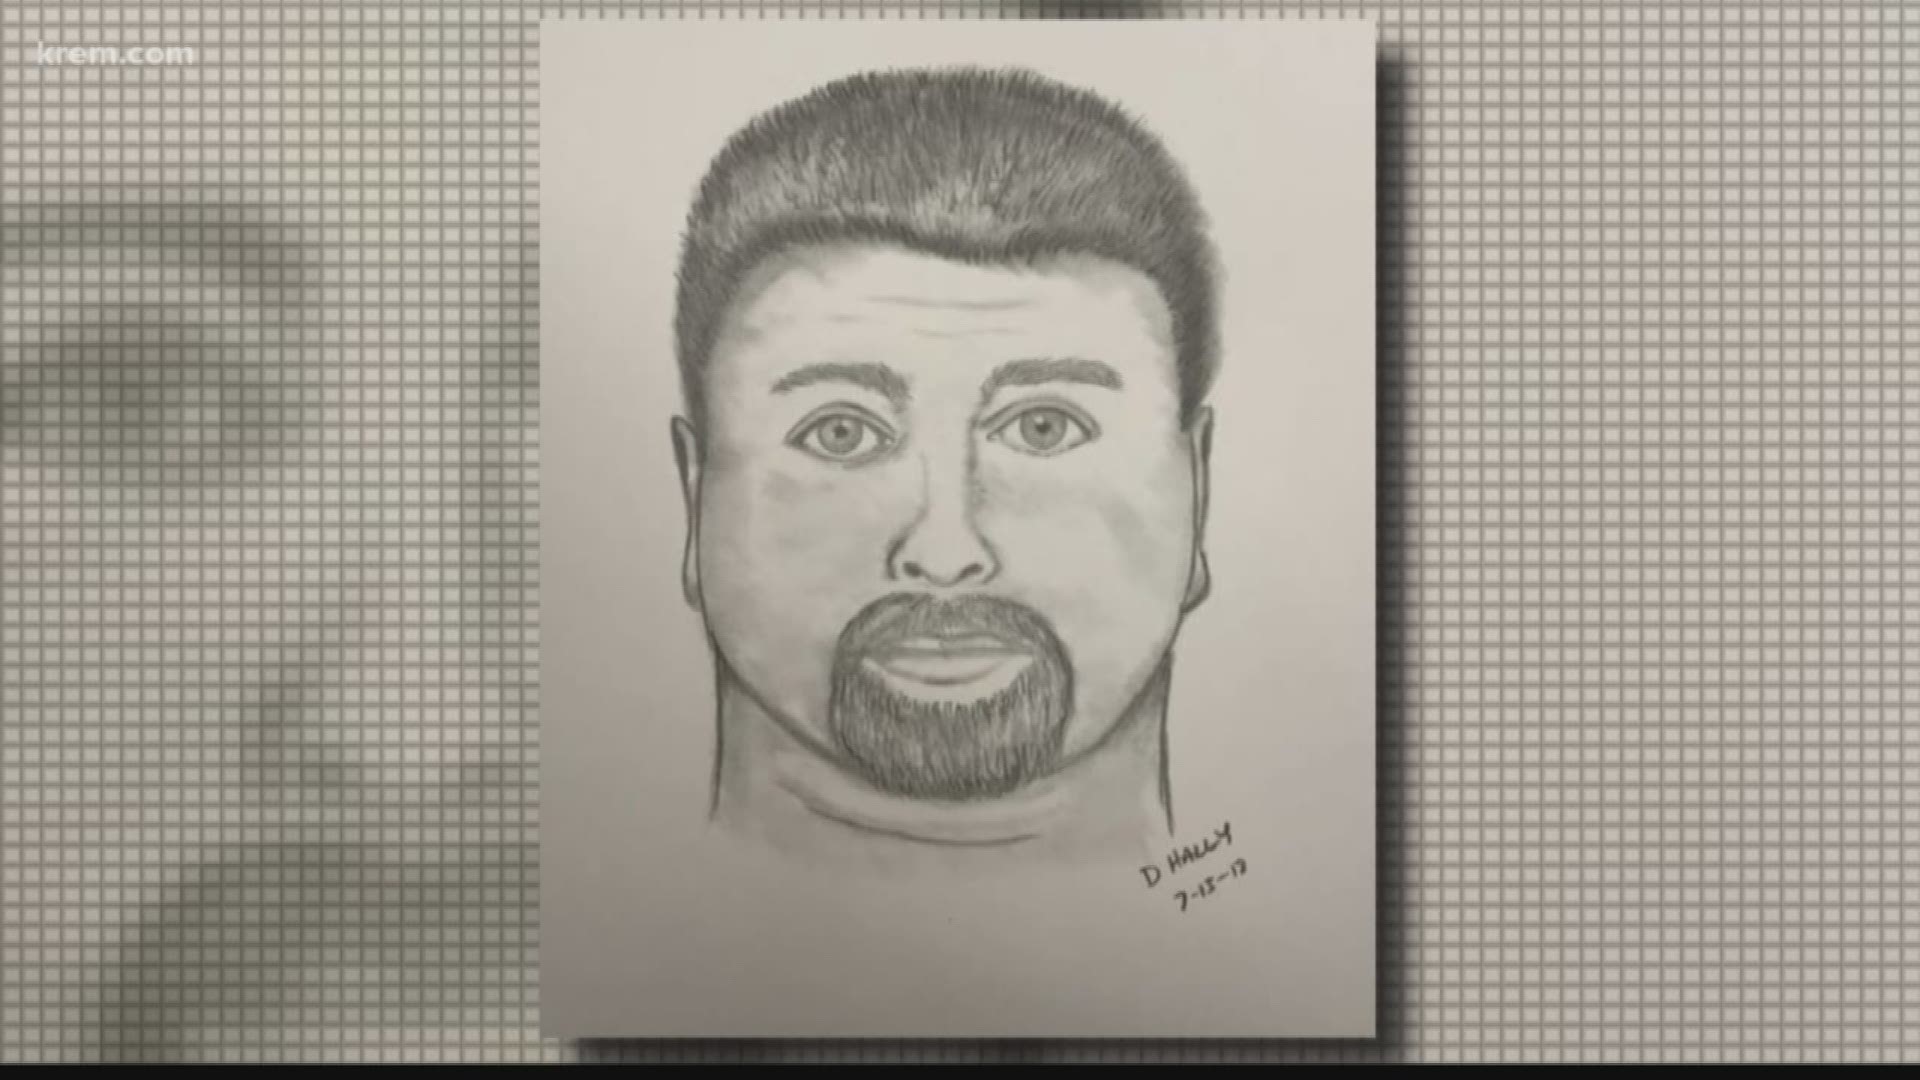 Moscow Police release sketch of sexual assault suspect